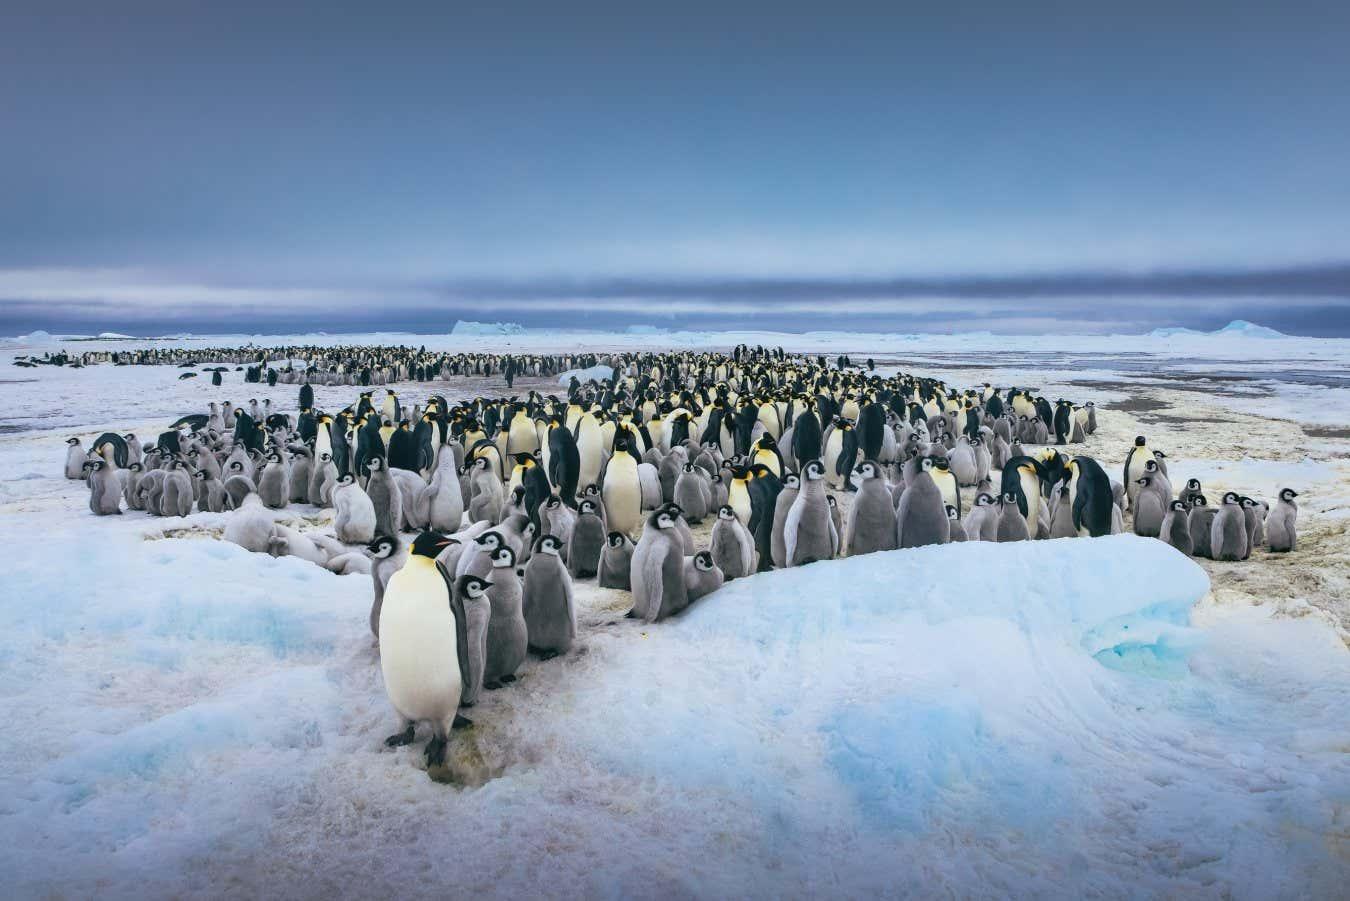 Best Practices for Conducting Research on Penguin Colonies